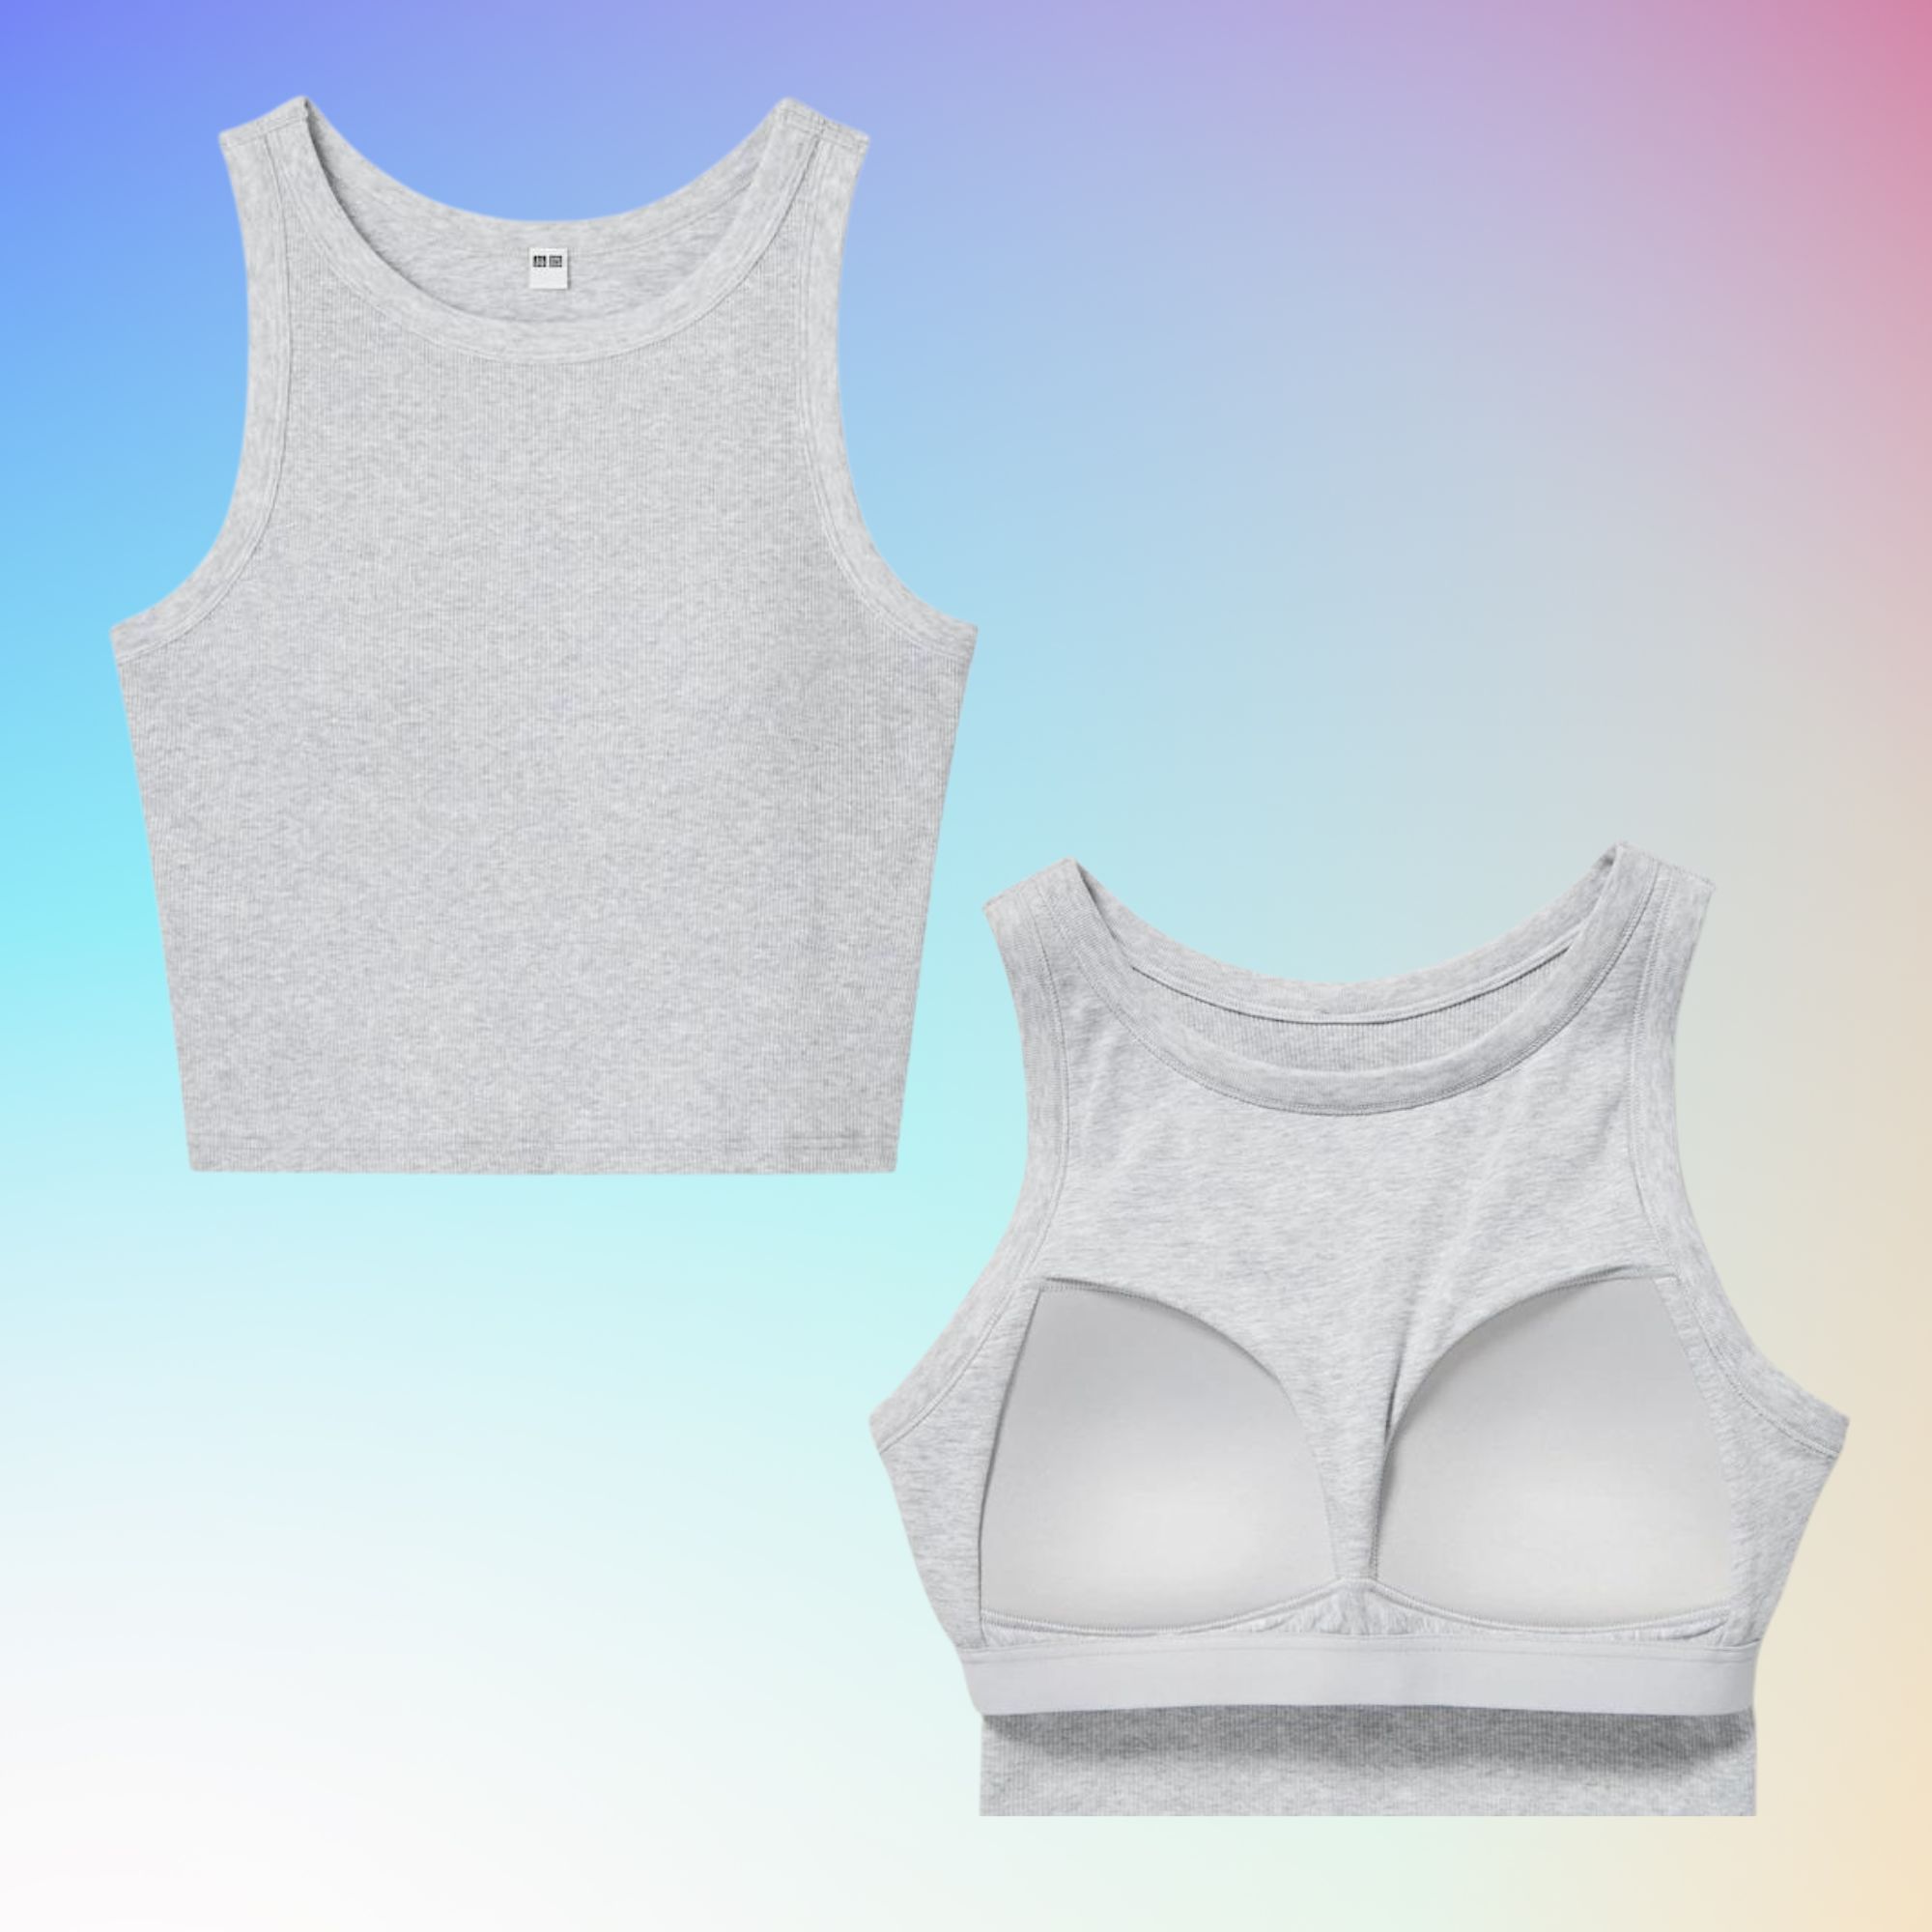 Grab the Tank Top With Built-In Bra That TikTok Is Obsessing Over